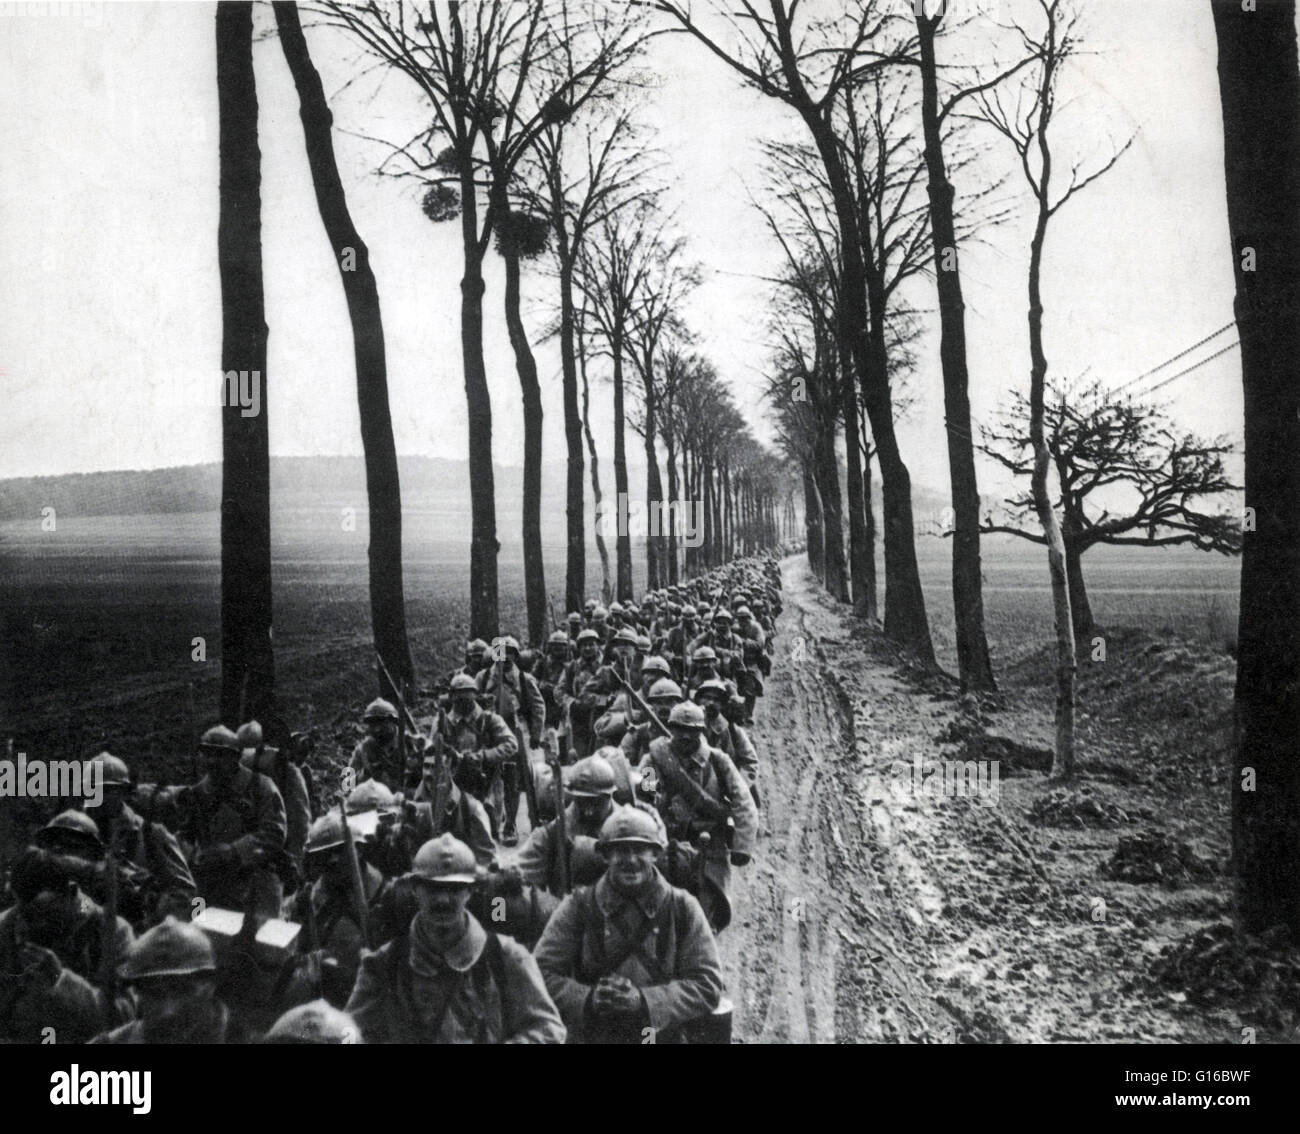 The Battle of the Somme was a battle of WWI fought by the armies of the British and French empires against the German Empire. It took place between July 1 and November 18, 1916 on either side of the River Somme in France. The battle was one of the largest Stock Photo